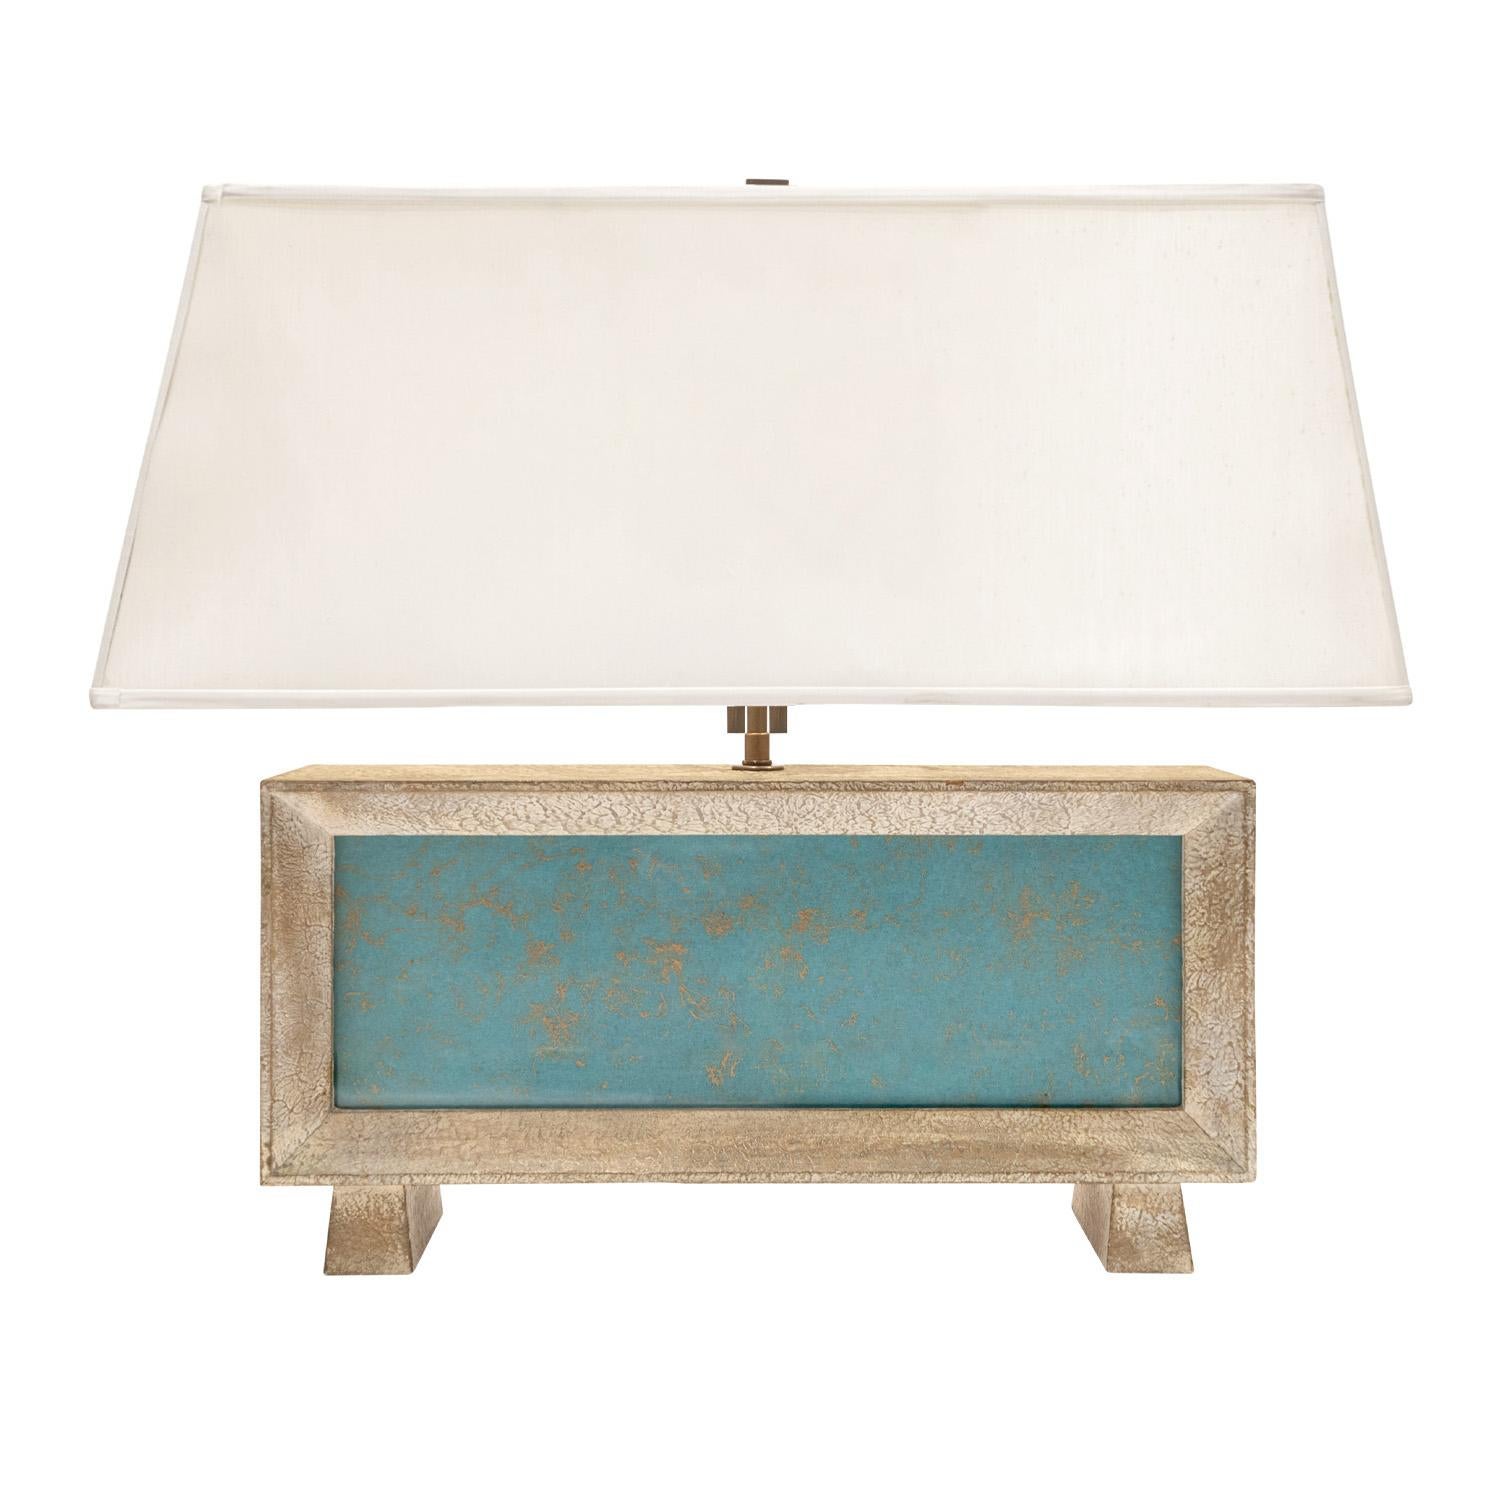 Boxy table lamp with textured gold and white resin finish and illuminating blue and gold reverse-painted glass front panel, American 1940's.  This lamp is stunning and enchanting when the backlit panel is illuminated.  Rewired by Lobel Modern. 